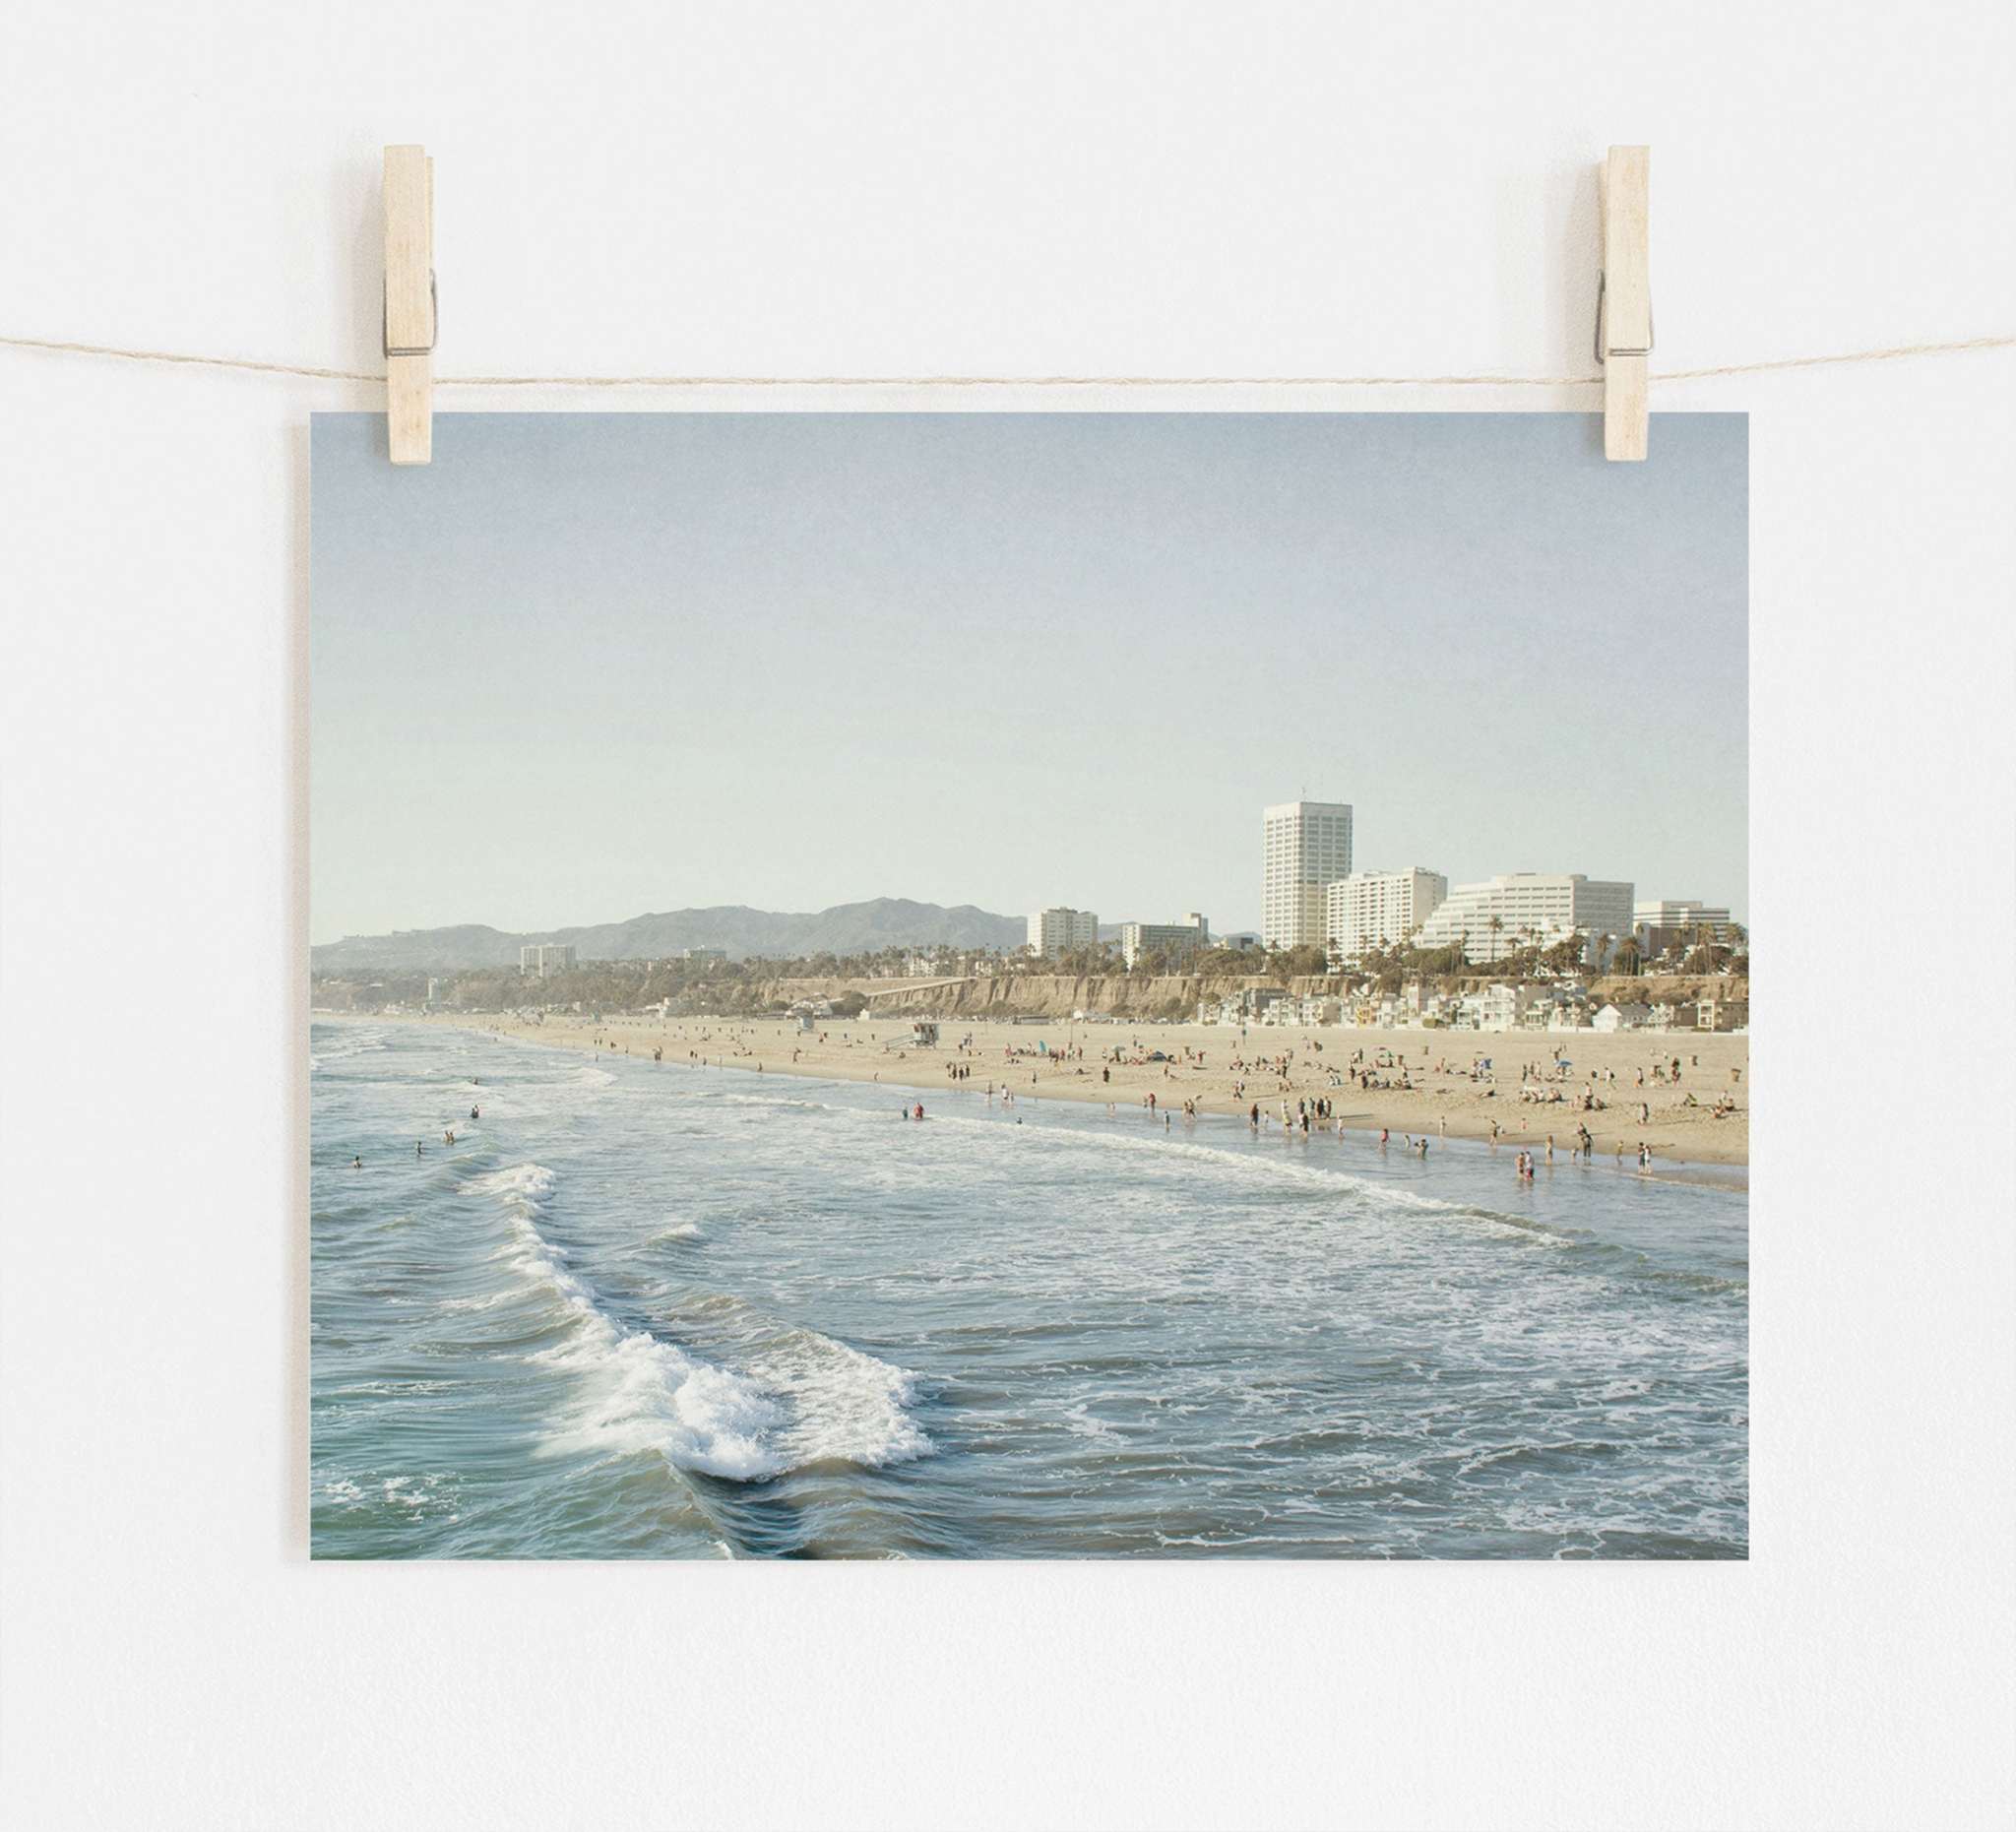 A photograph of a bustling beach scene with waves gently lapping the shore, pinned up by two wooden pegs against a plain background on archival photographic paper. The city skyline is visible in the distance. Offley Green's Santa Monica Print, 'Santa Monica Seaside'.